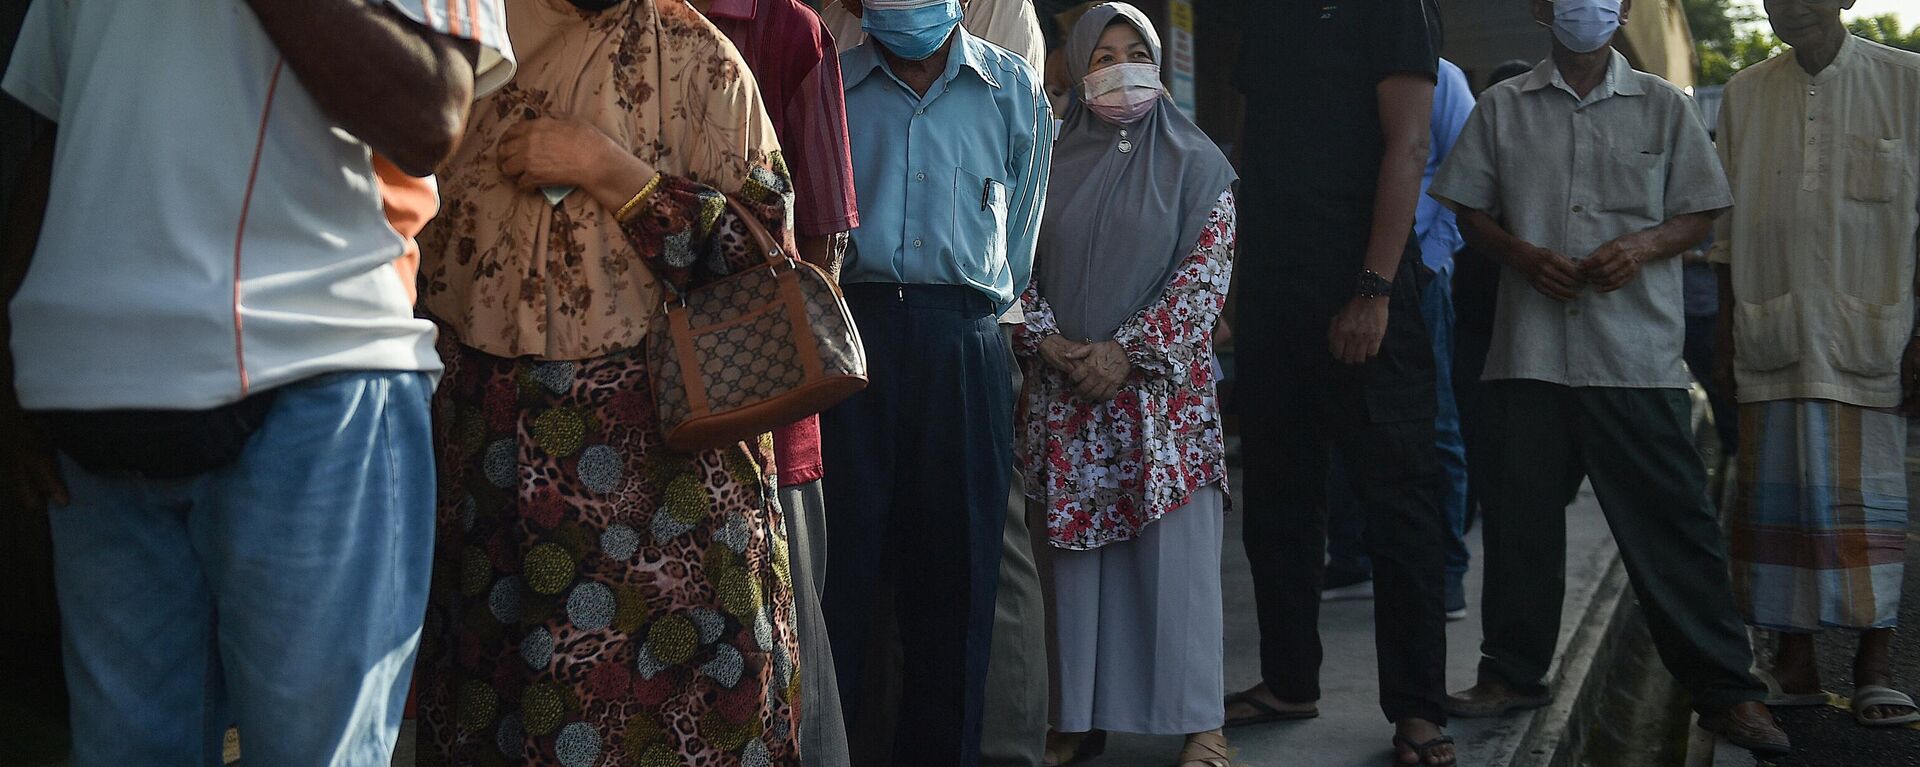 Voters line up at a polling station during the general election in Permatang Pauh, Malaysia's Penang state, on November 19, 2022. - Sputnik International, 1920, 23.11.2022